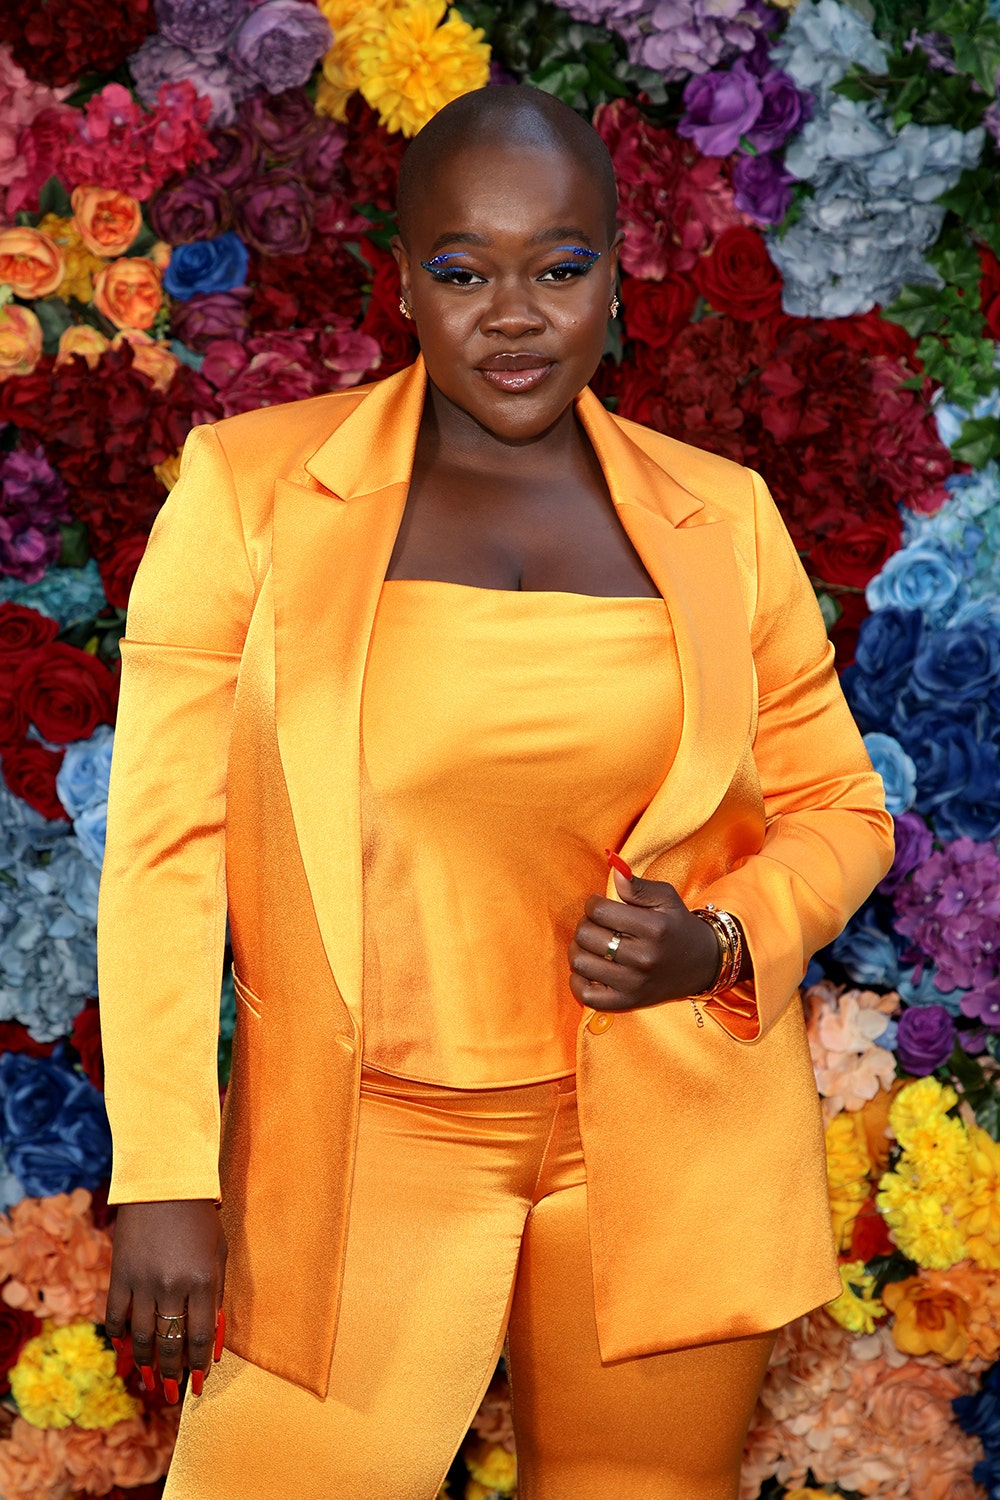 Achieng Agutu stands in front of a wall of flowers wearing a bright gold suit.